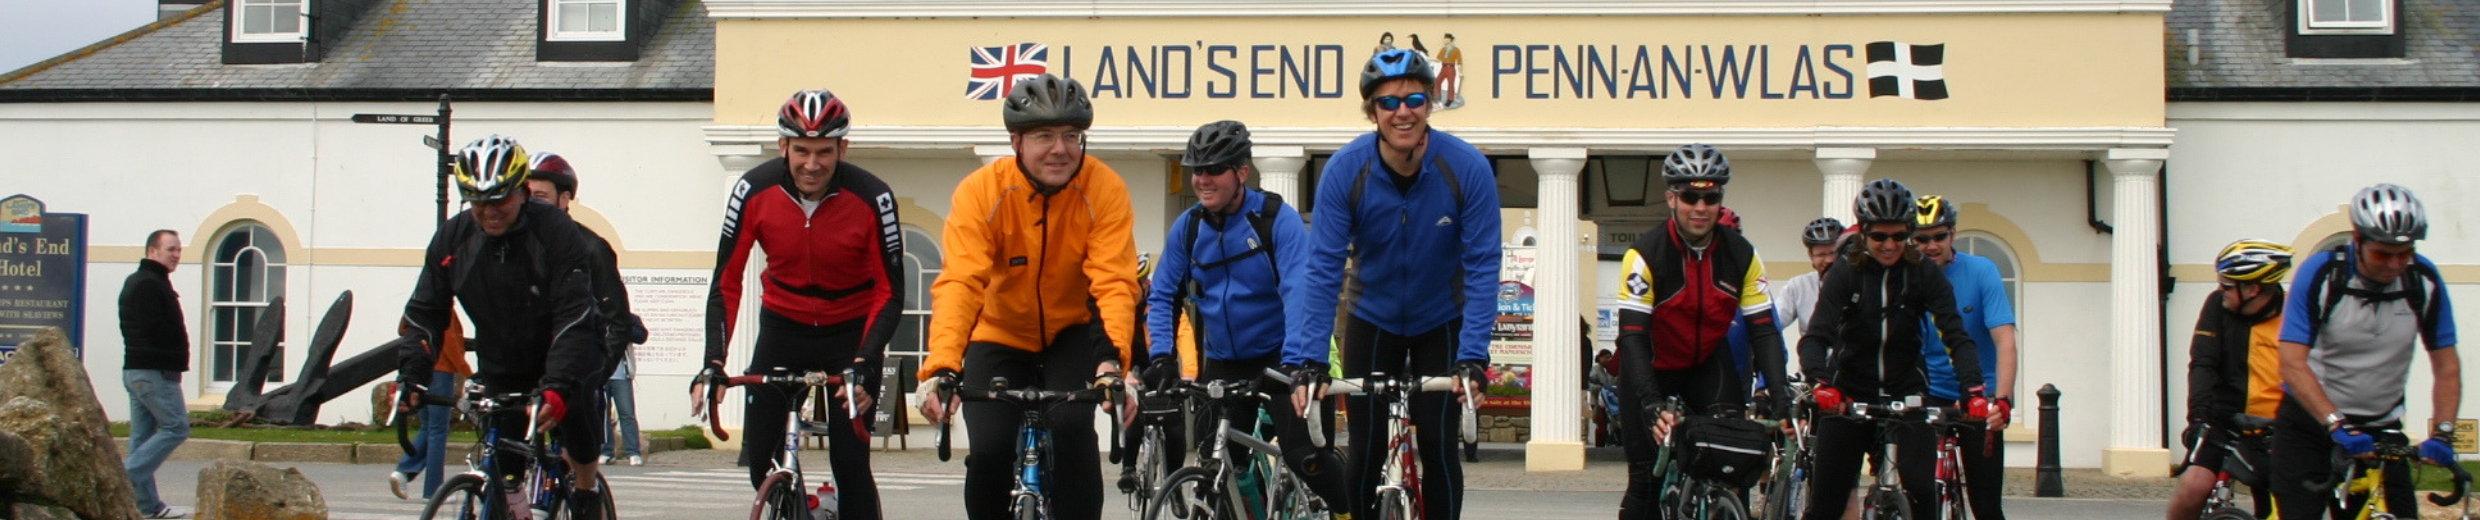 lands end to john o groats riders